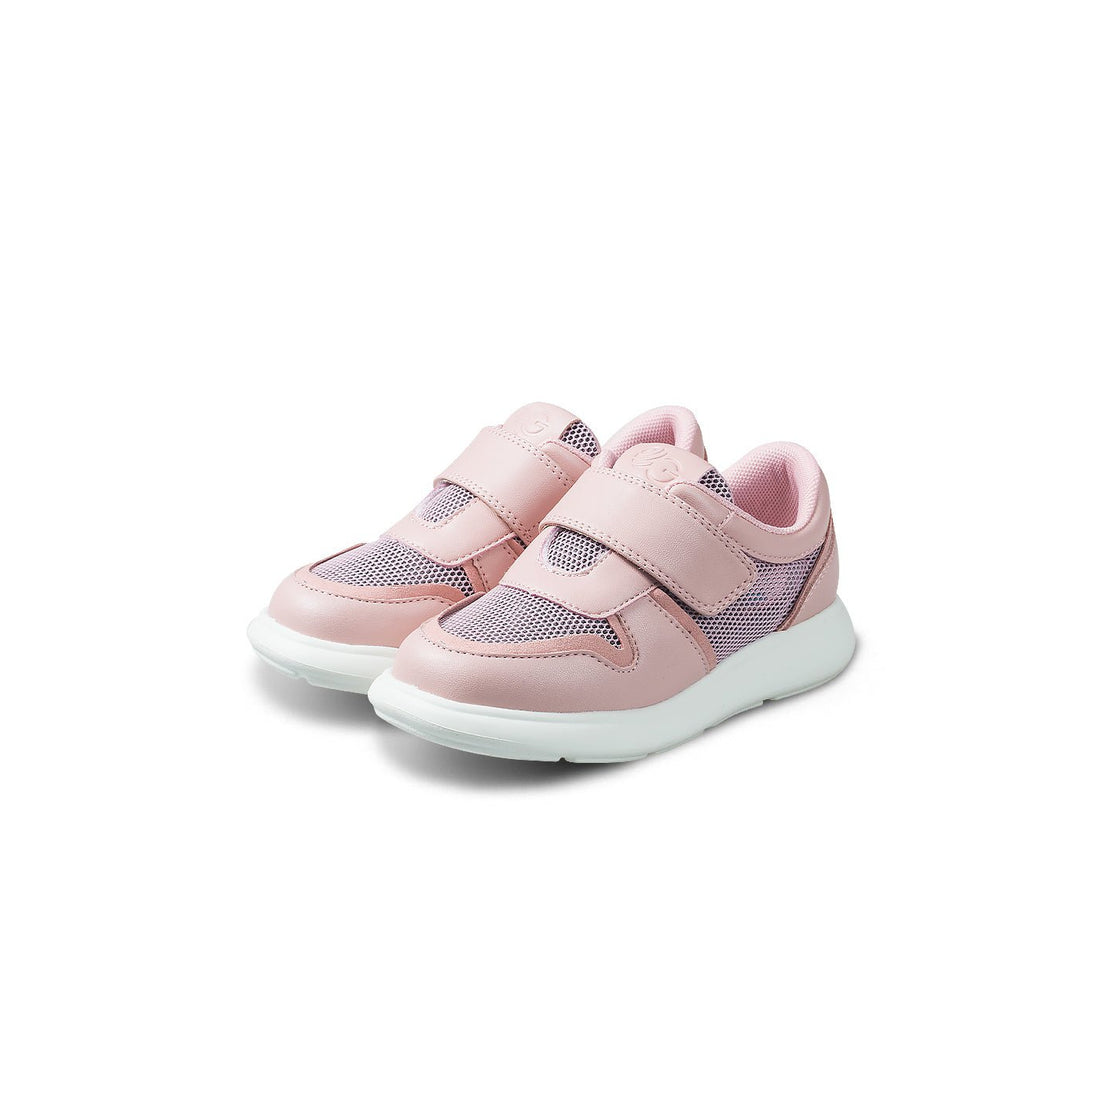 OSLO Extra Lightweight Girl Pink Sneakers - 0cm